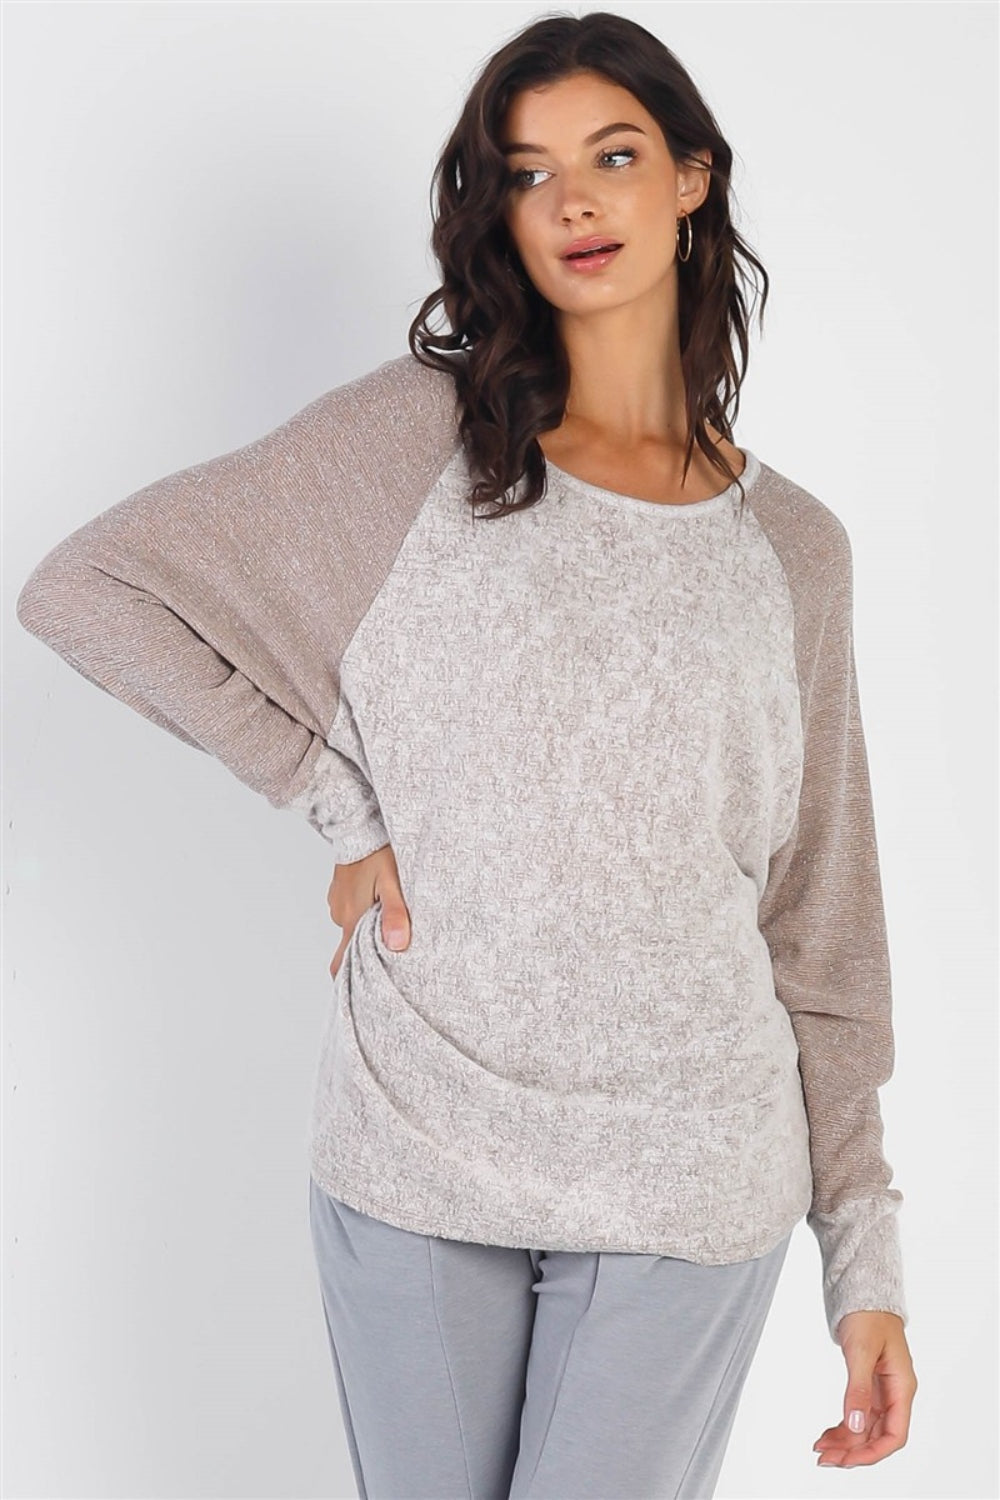 Cherish Apparel Round Neck Long Sleeve Contrast Top Taupe S 